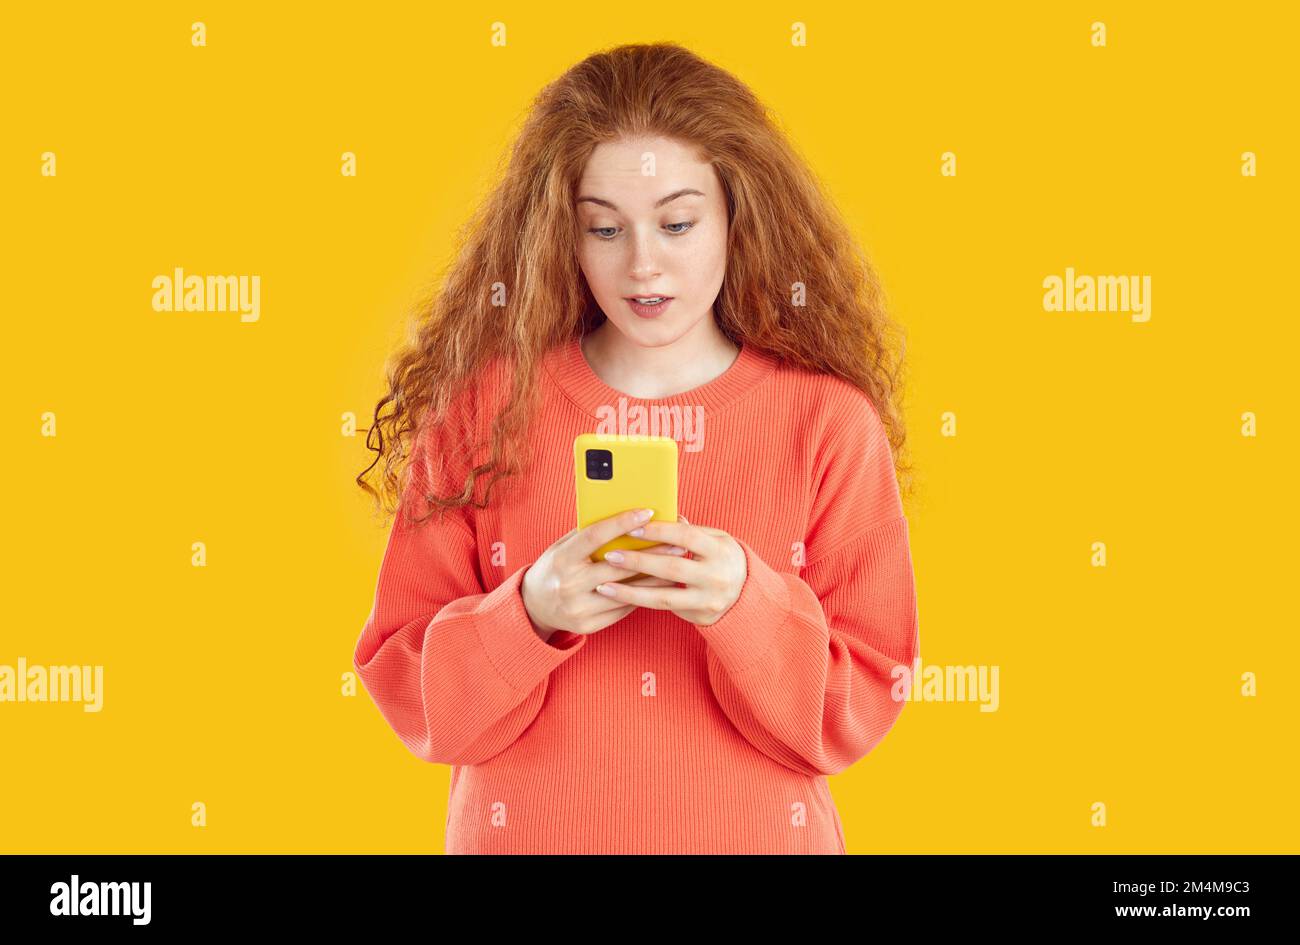 Frustrated amazed redhead girl with curly hair looking at smartphone screen on yellow background. Stock Photo